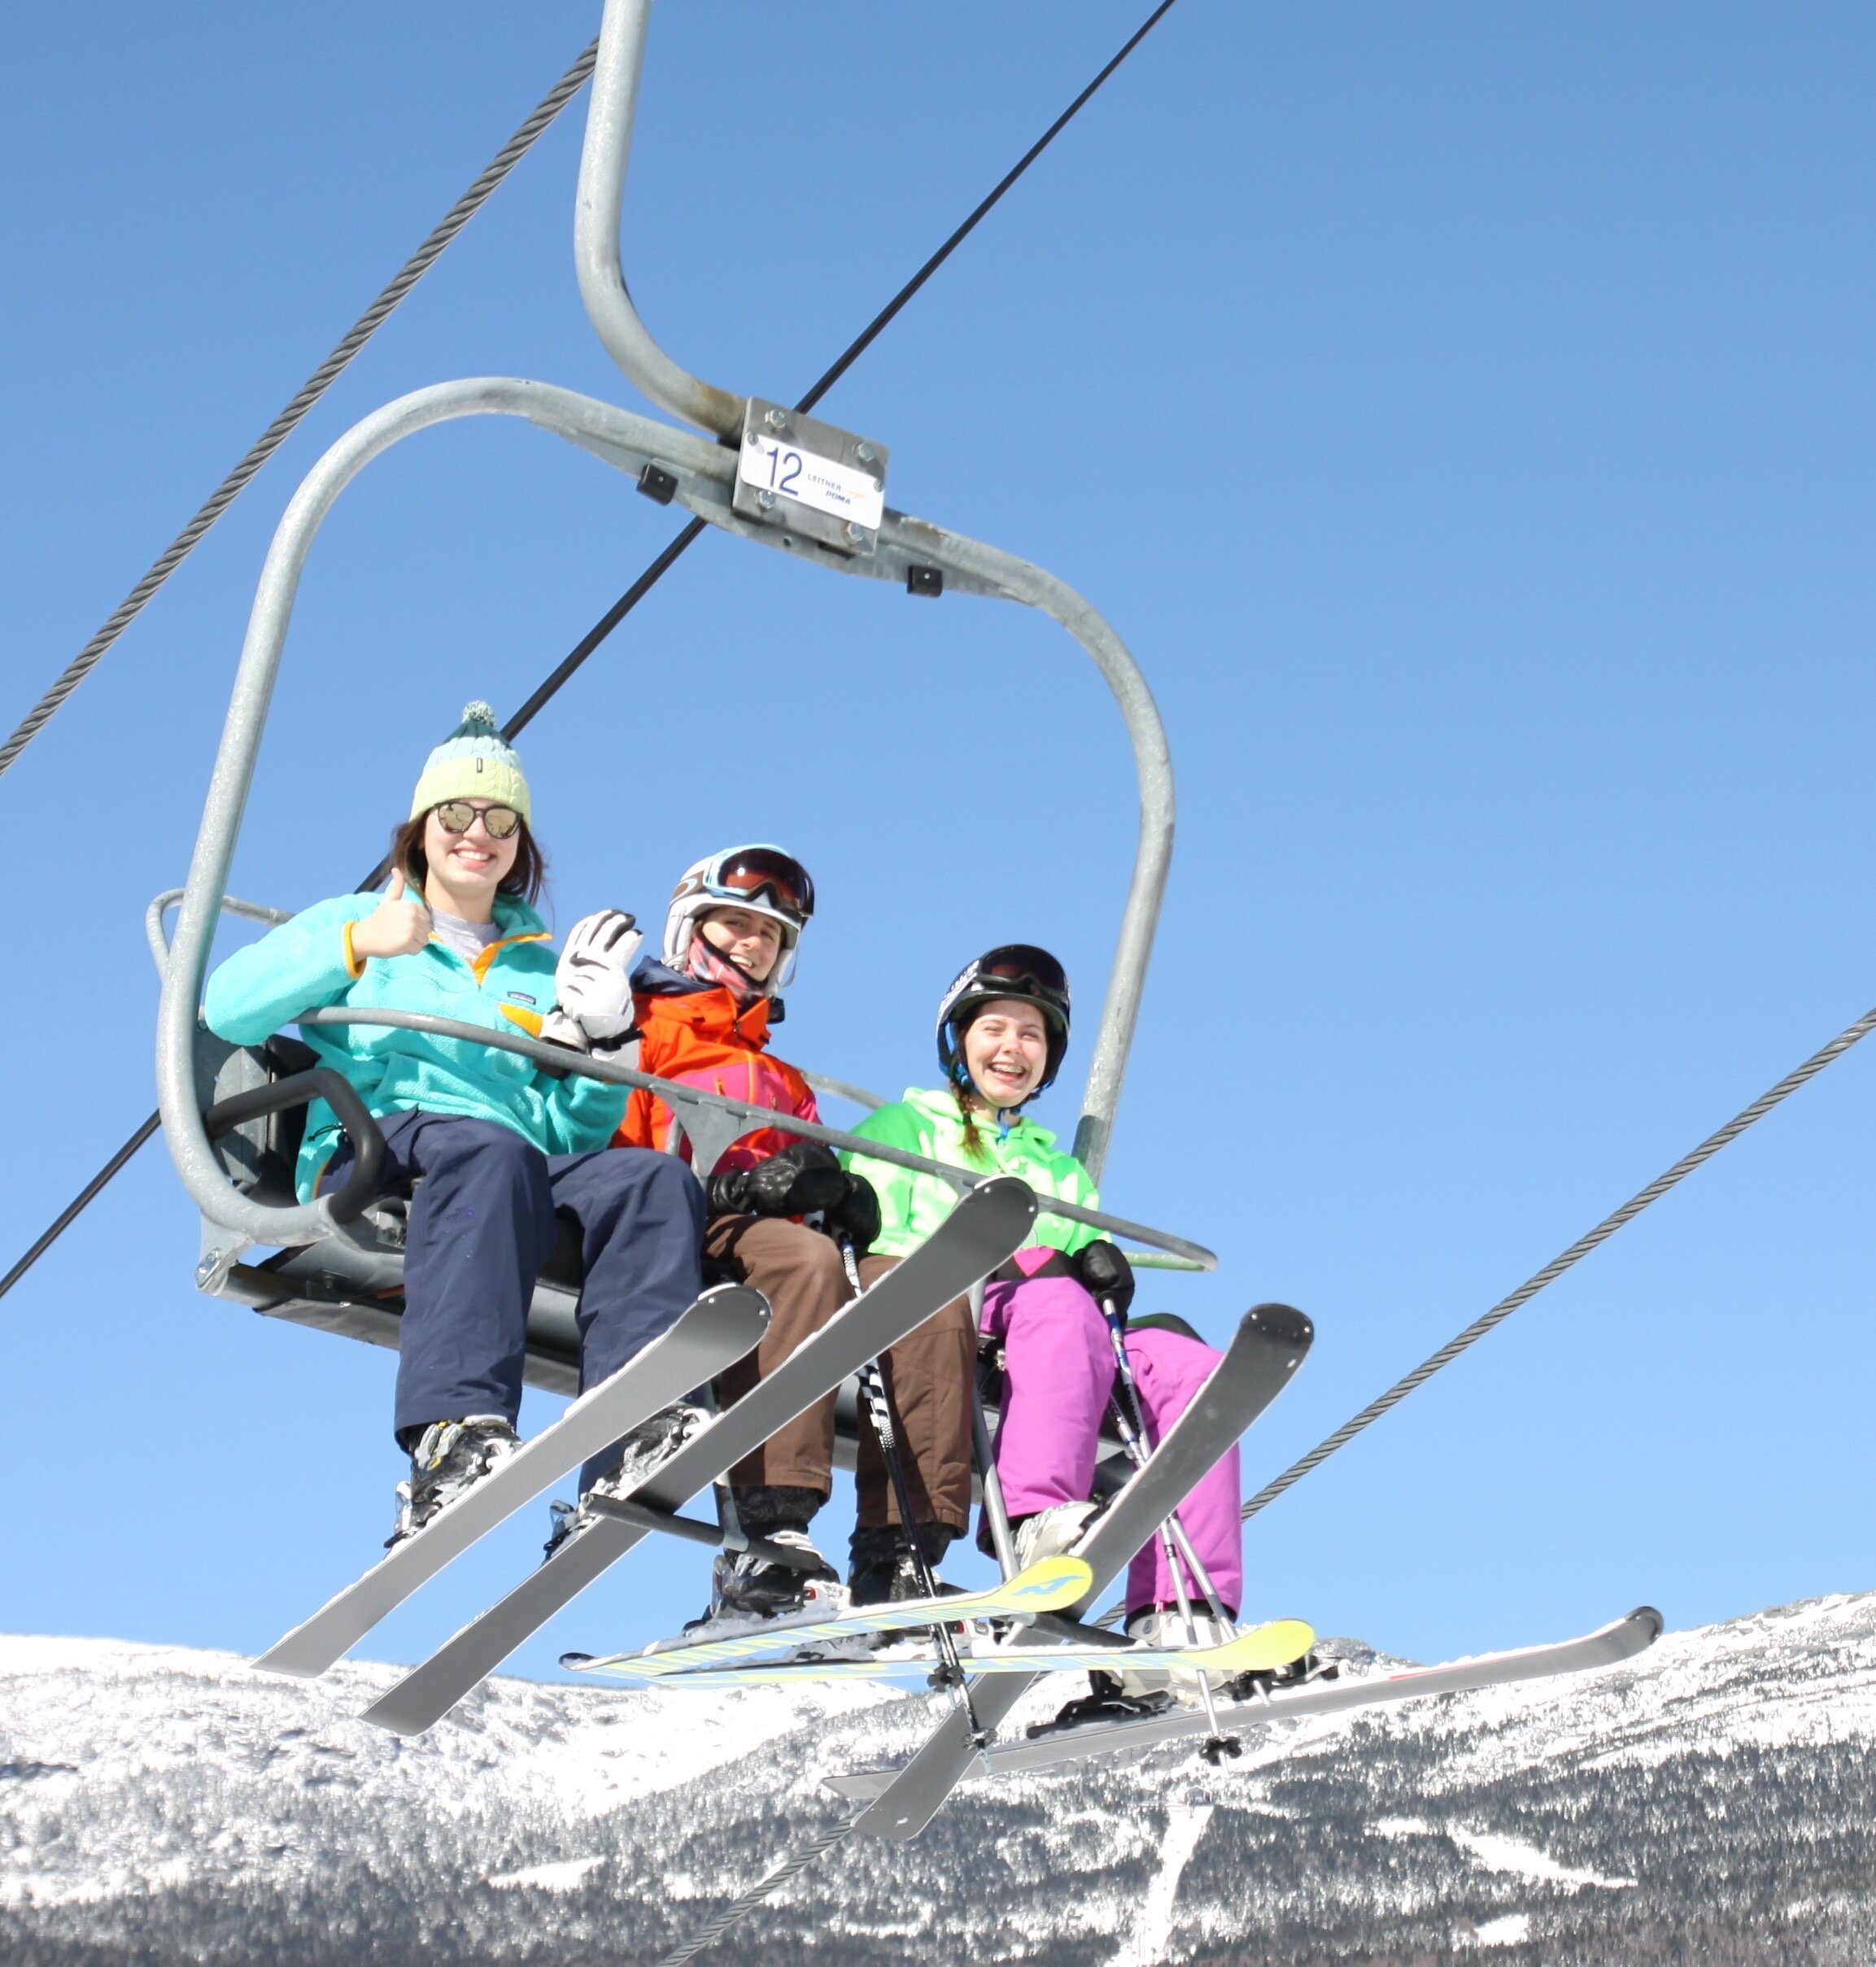 keira_and_coaches_on_lift_17.jpg